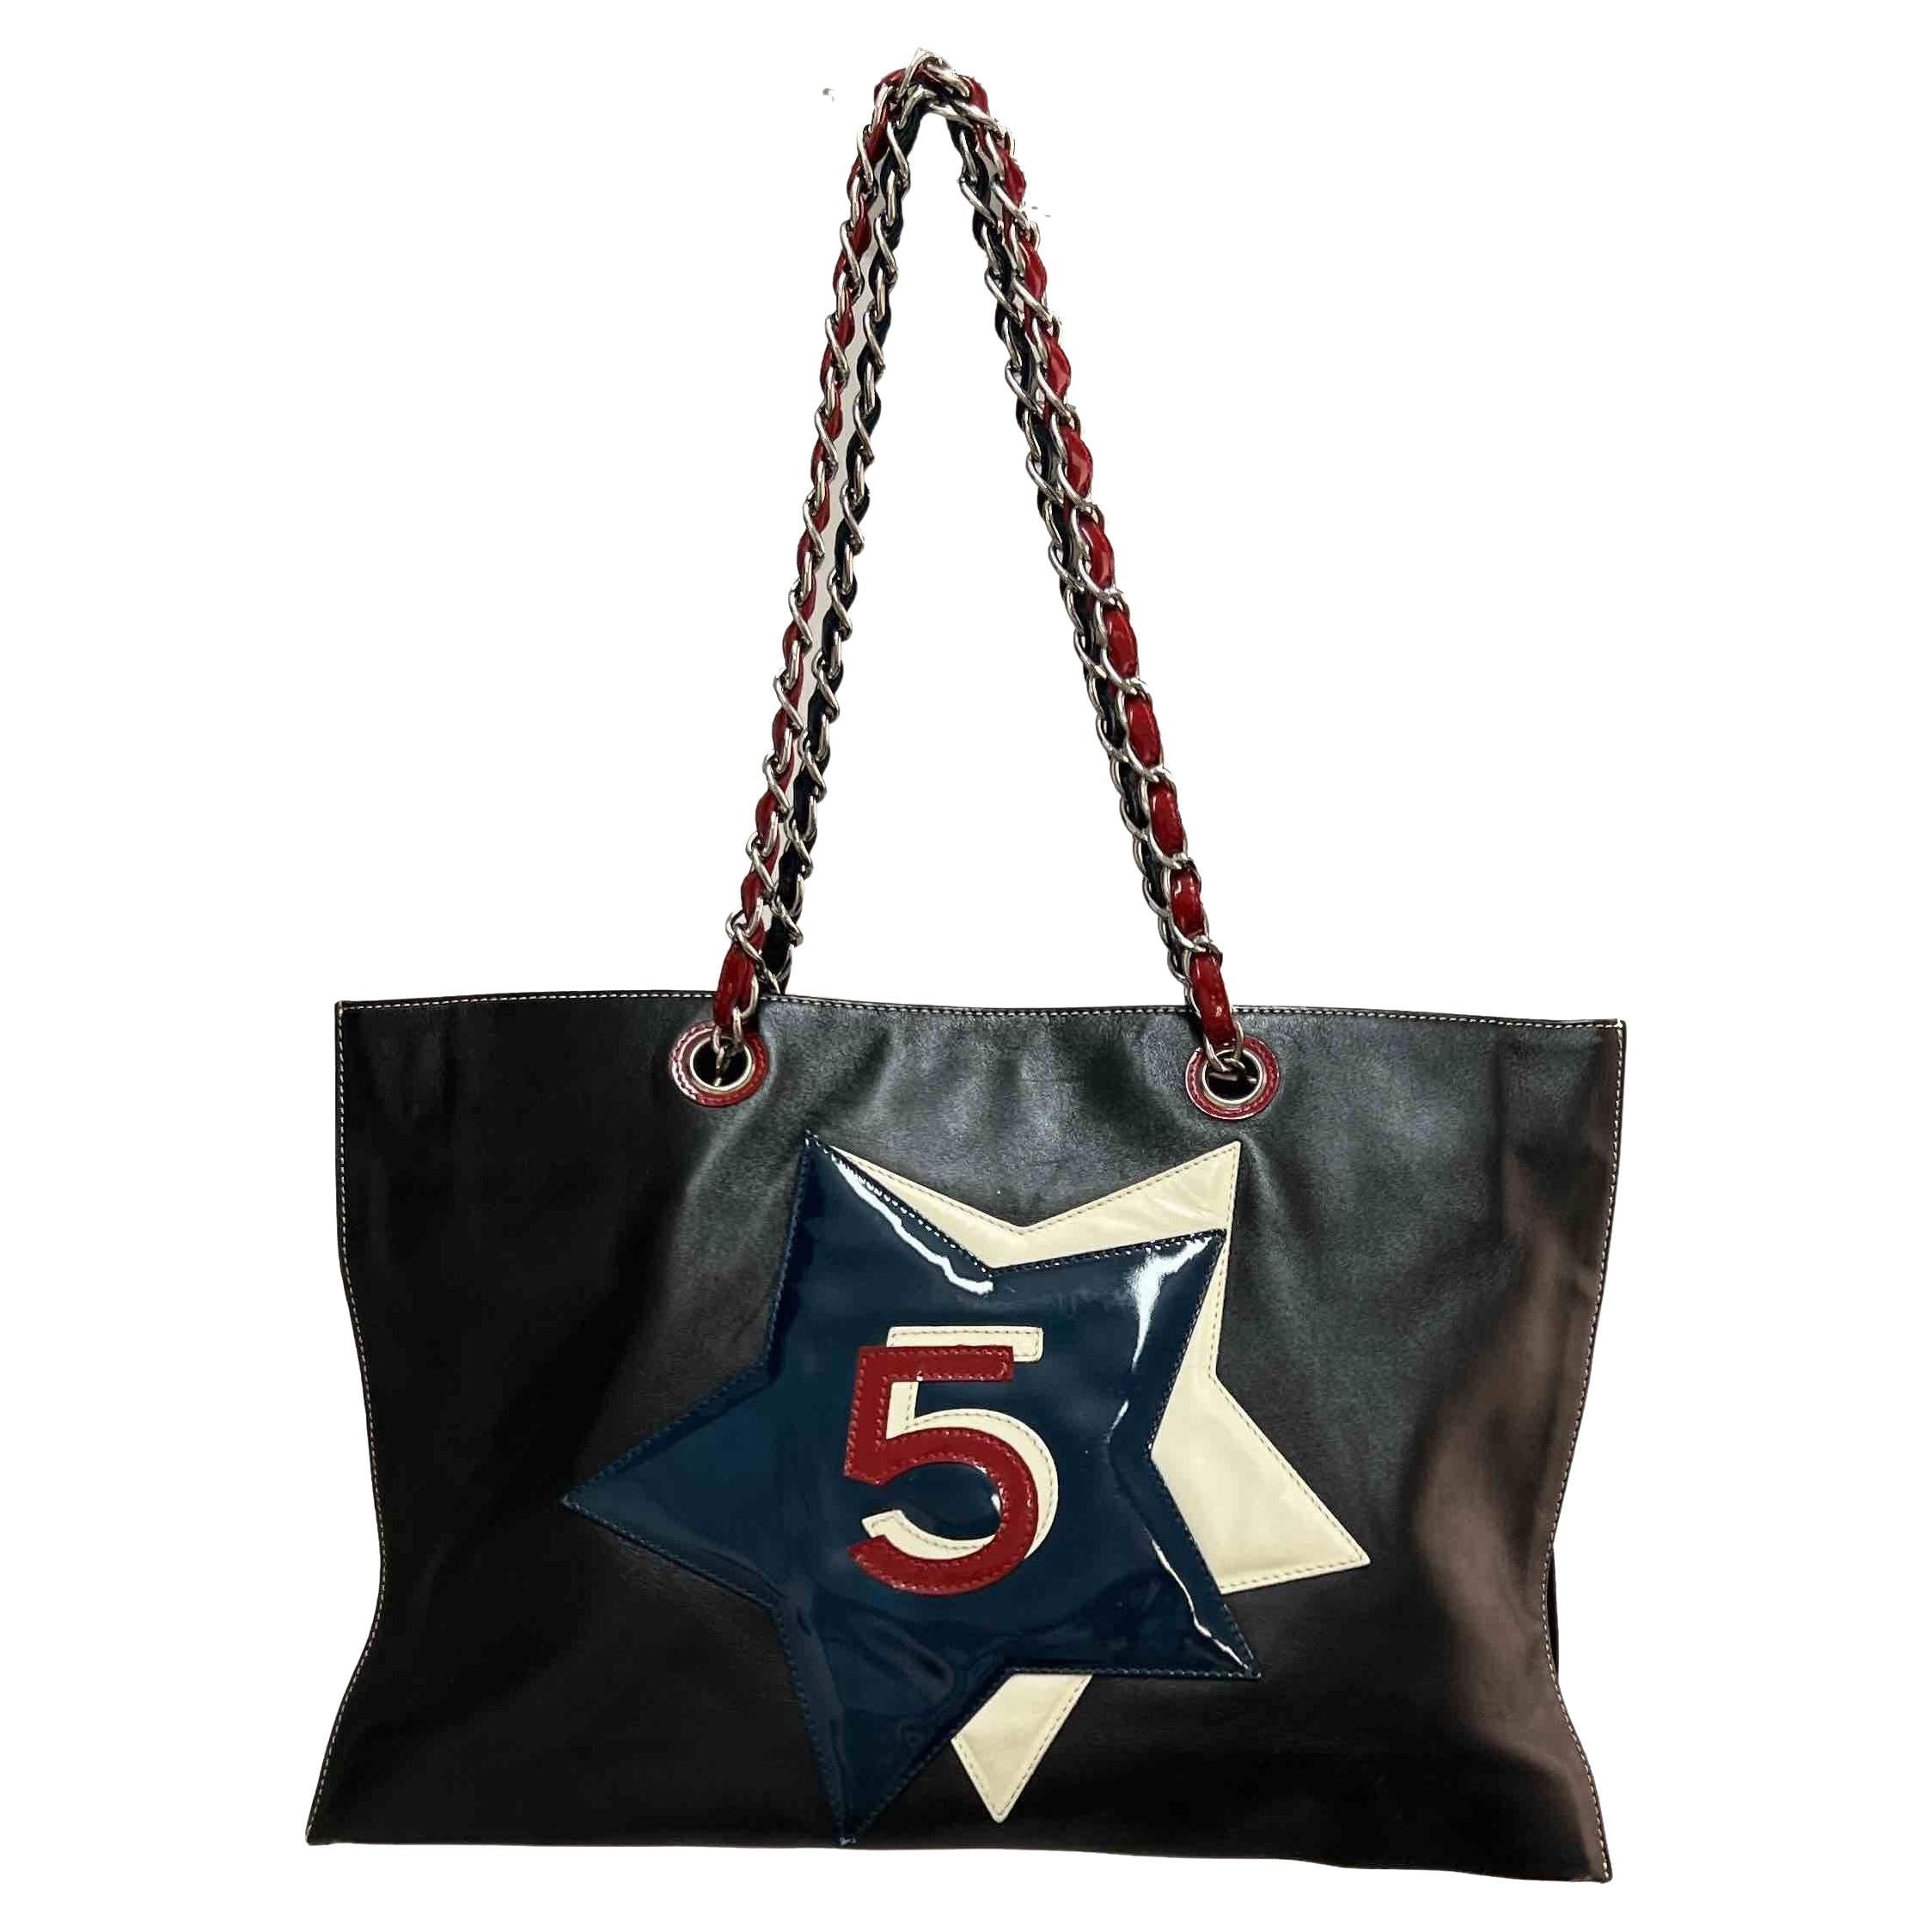 Vintage CHANEL tote bag in black, blue, white, red Leather.  Inside : 2 separate storage bellows. Magnetic closure. Double colors for the handles, one blue and one red.
The hardware is in palladium-plated silver metal.
In good condition.
Made in